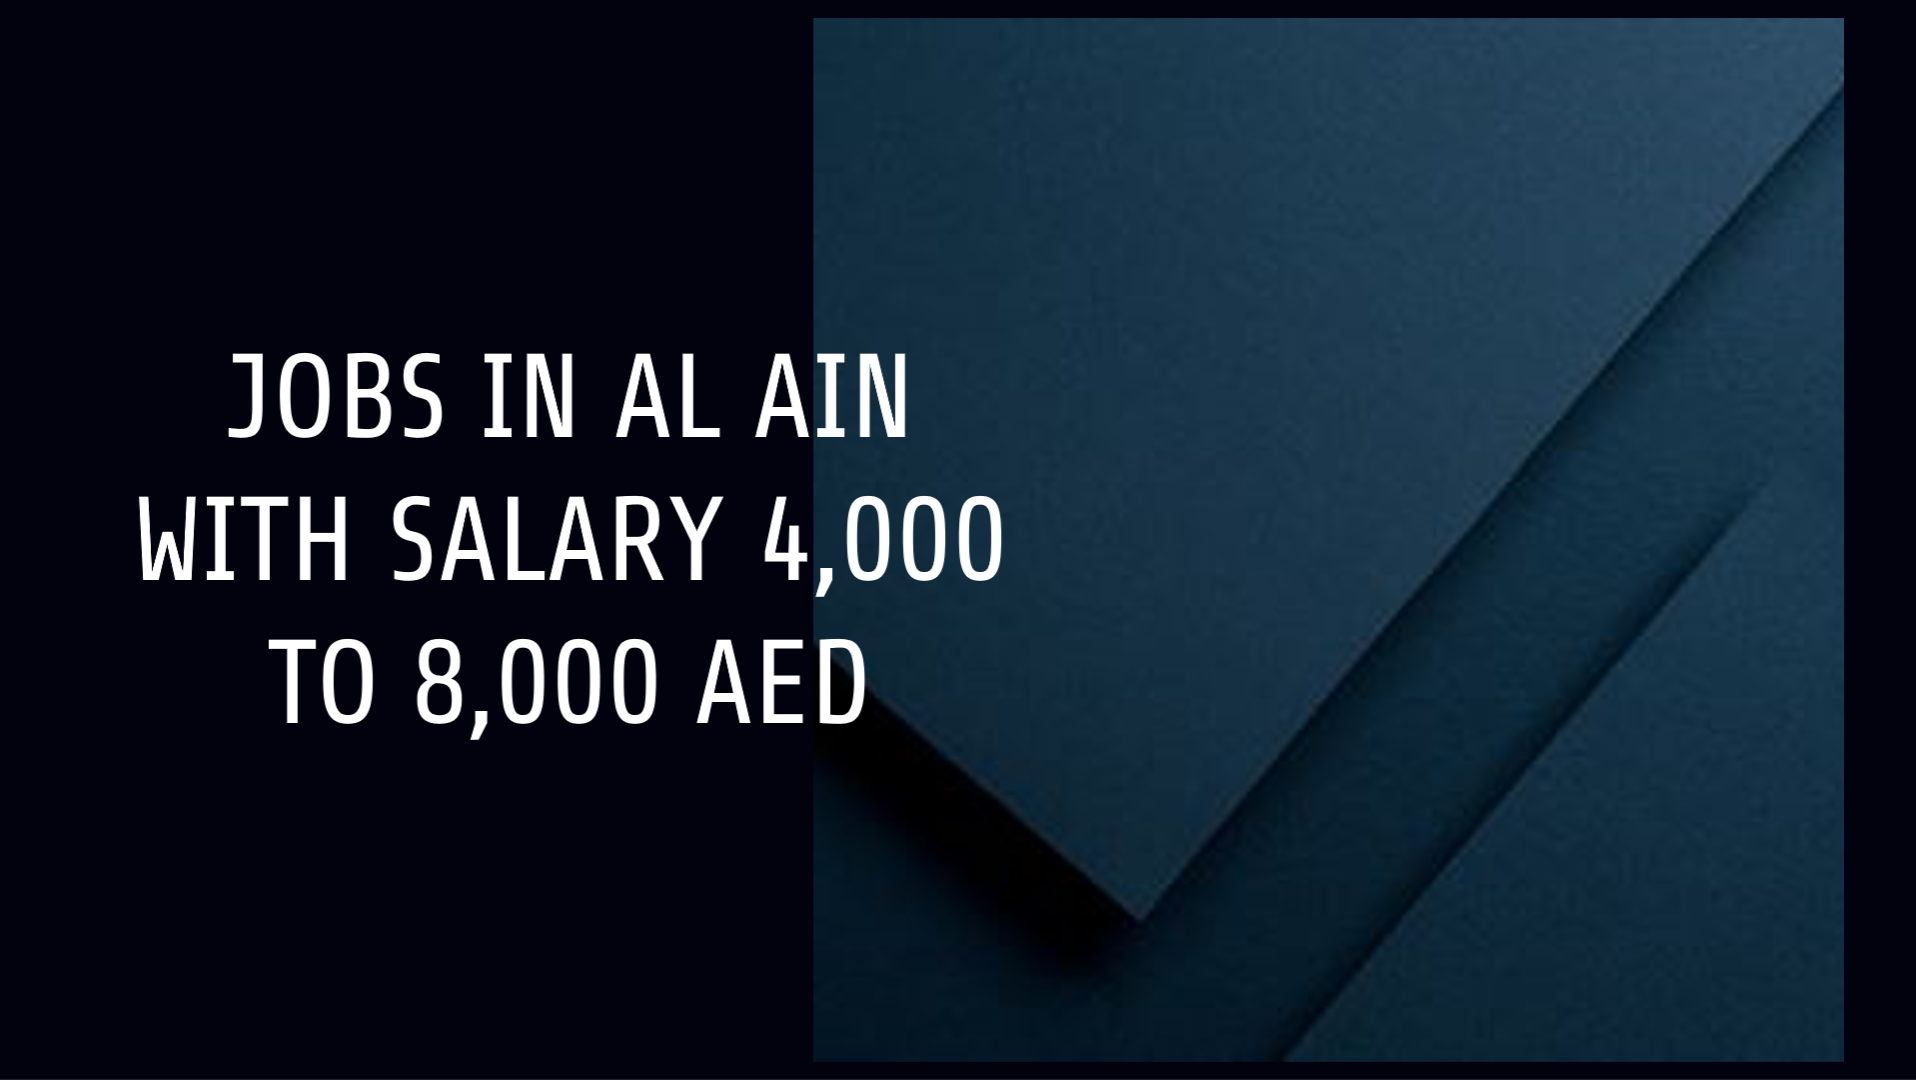 jobs in al ain with salary 4,000 to 8,000 AED